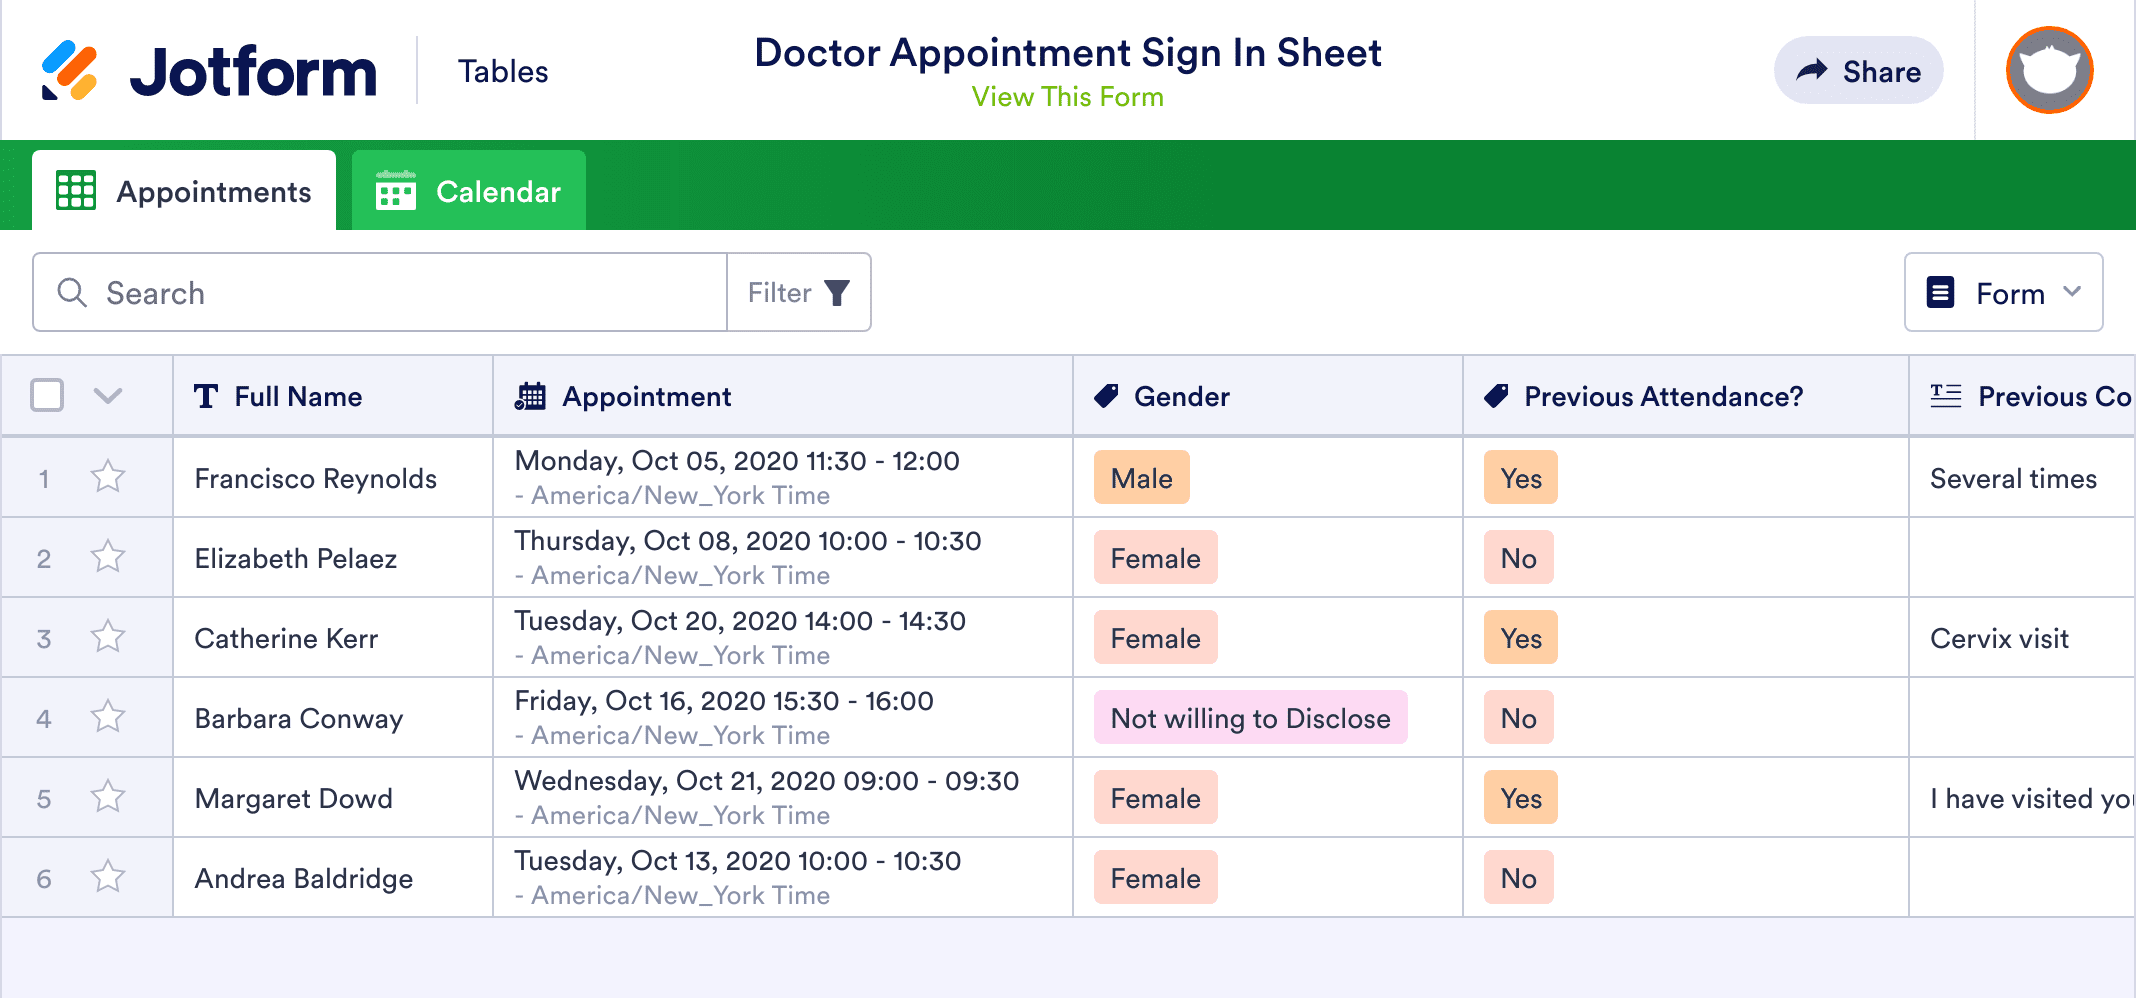 Doctor Appointment Sign In Sheet Template | Jotform Tables